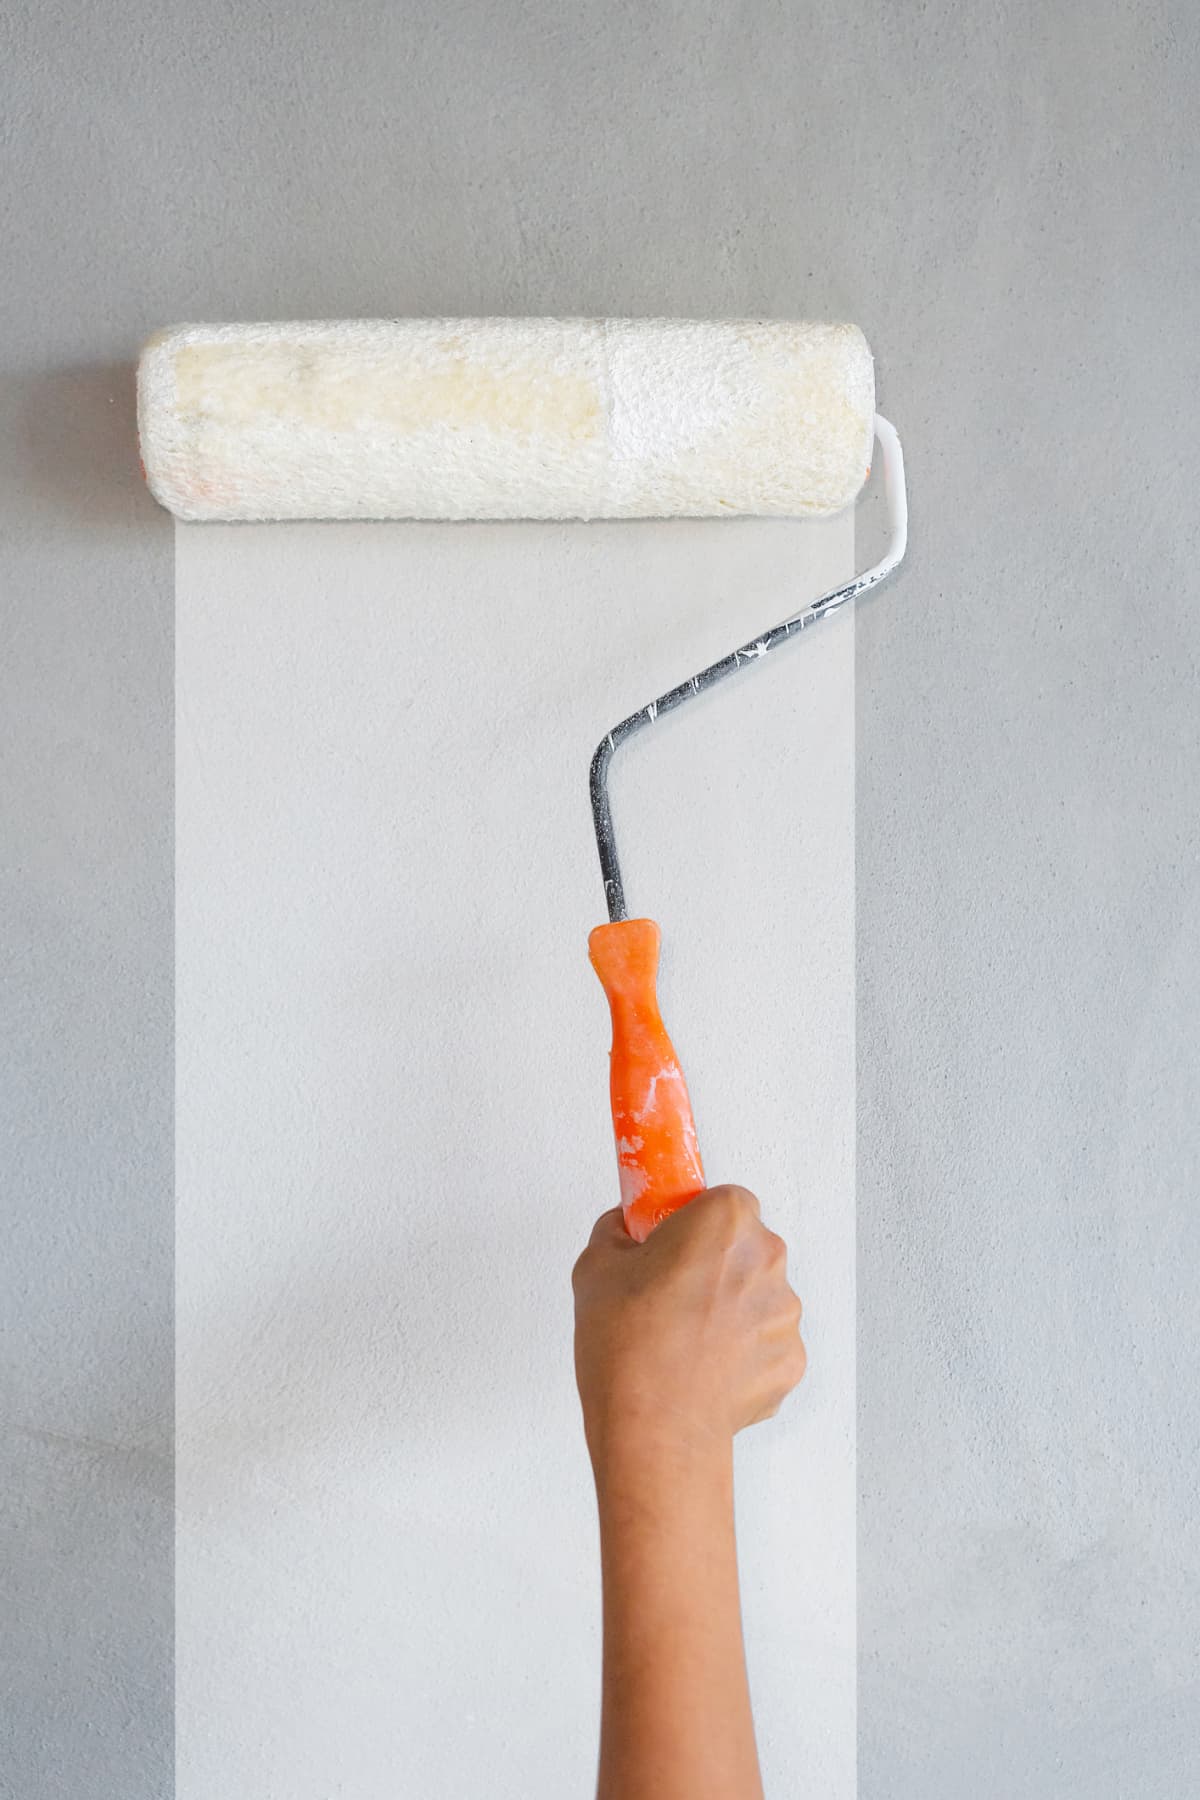 White paint being rolled onto a concrete wall